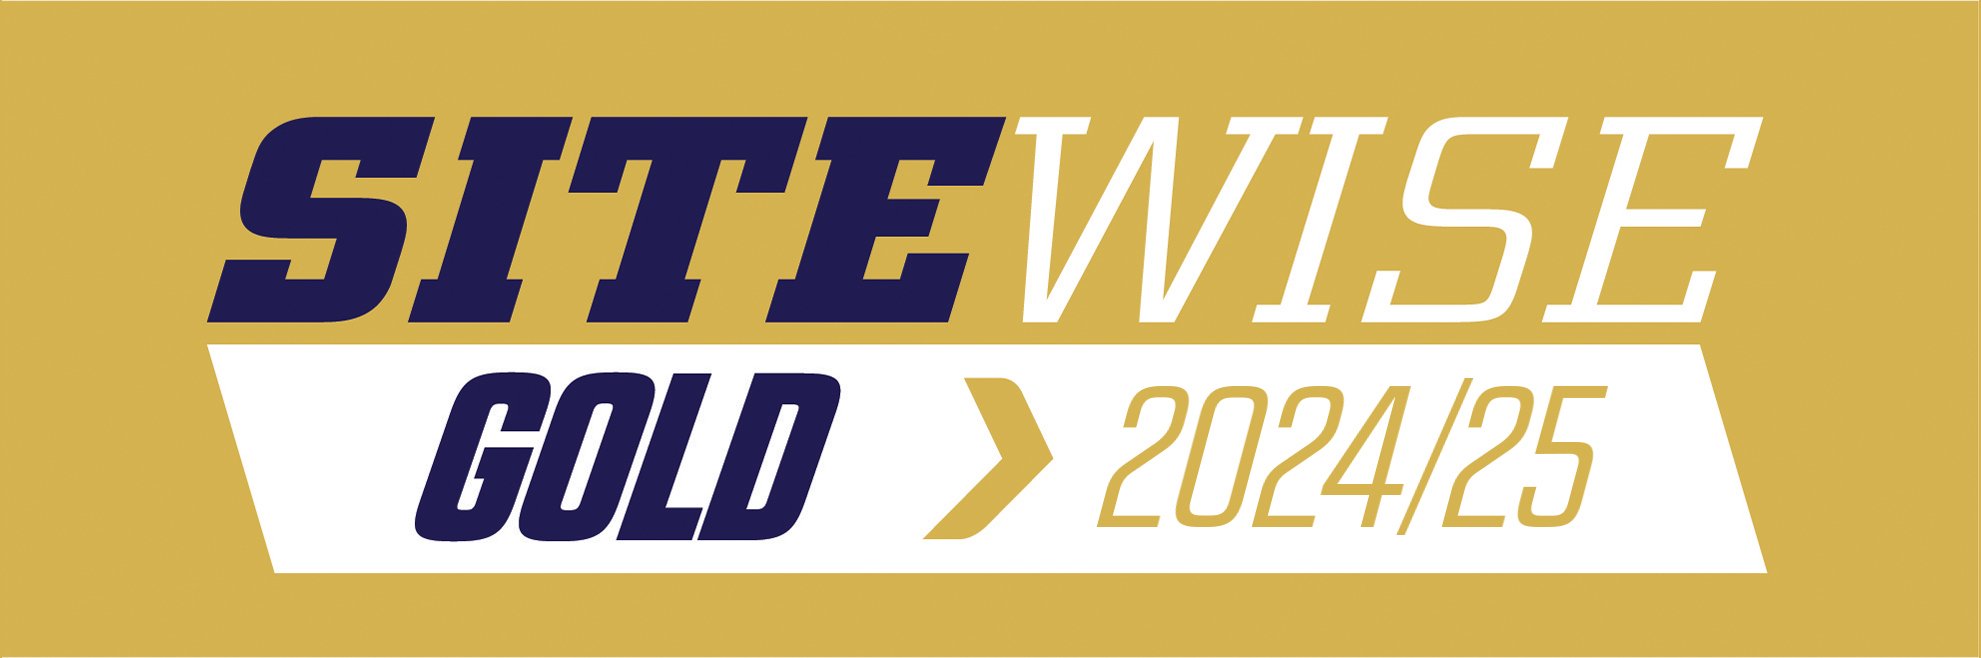 SiteWise-Gold.jpg